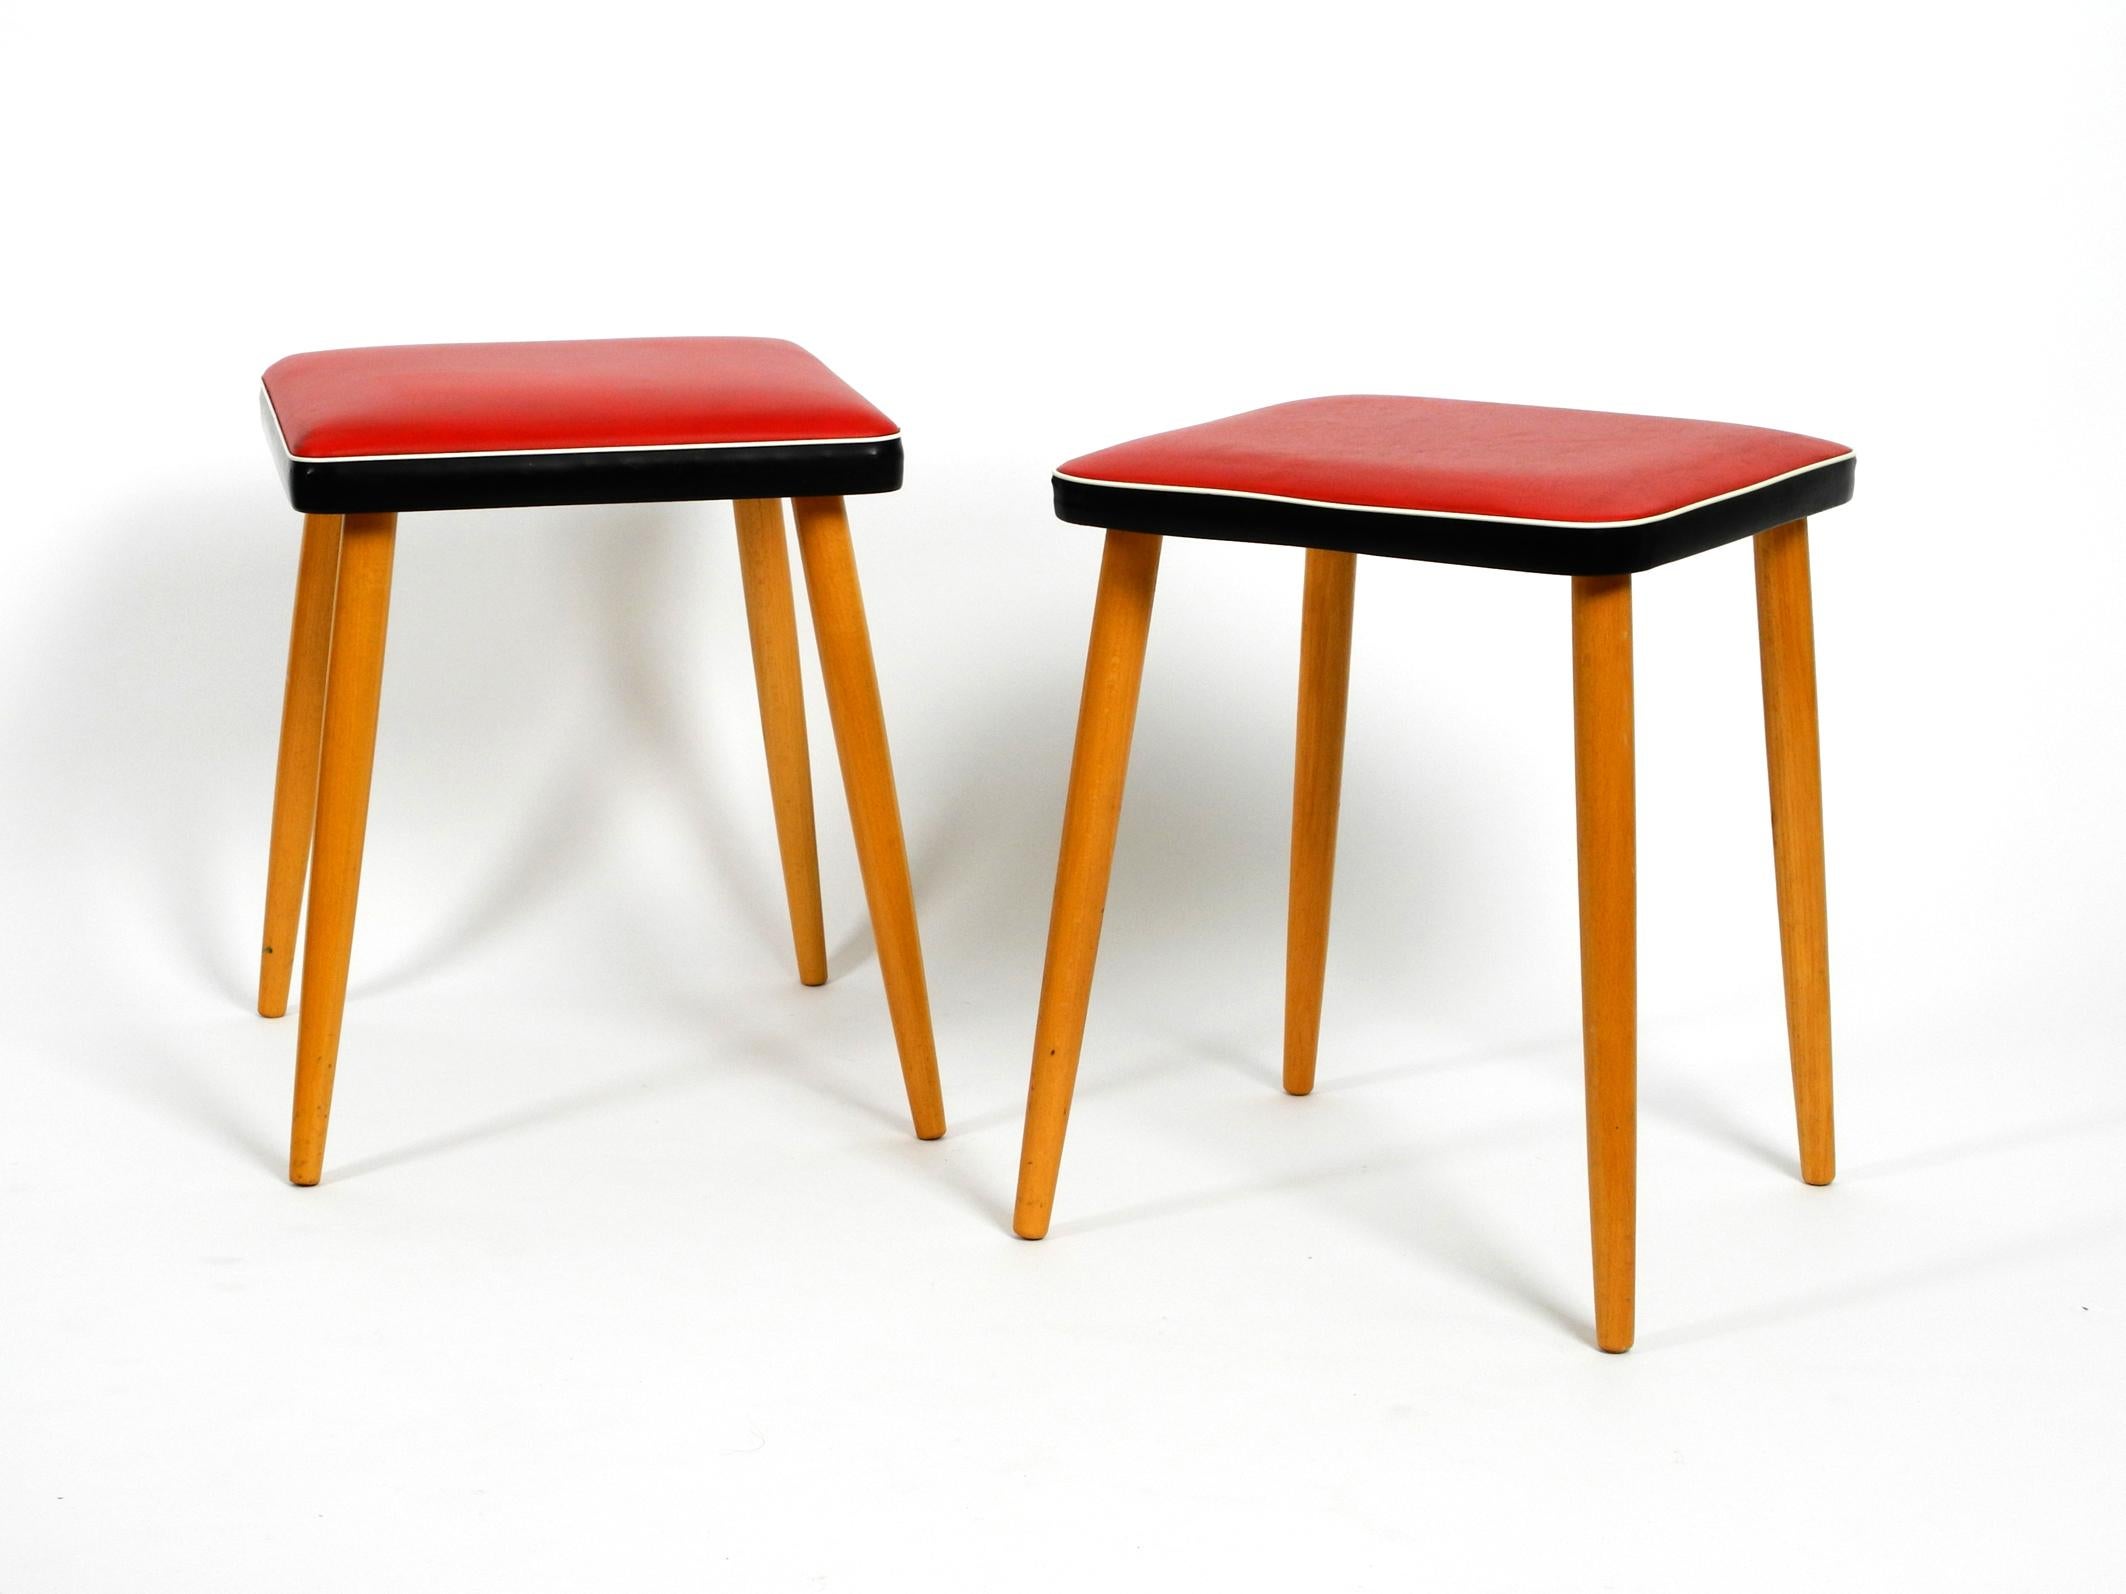 Mid-20th Century Pair of Almost Mint Midcentury Wooden Stools with Red Faux Leather Cover in Red